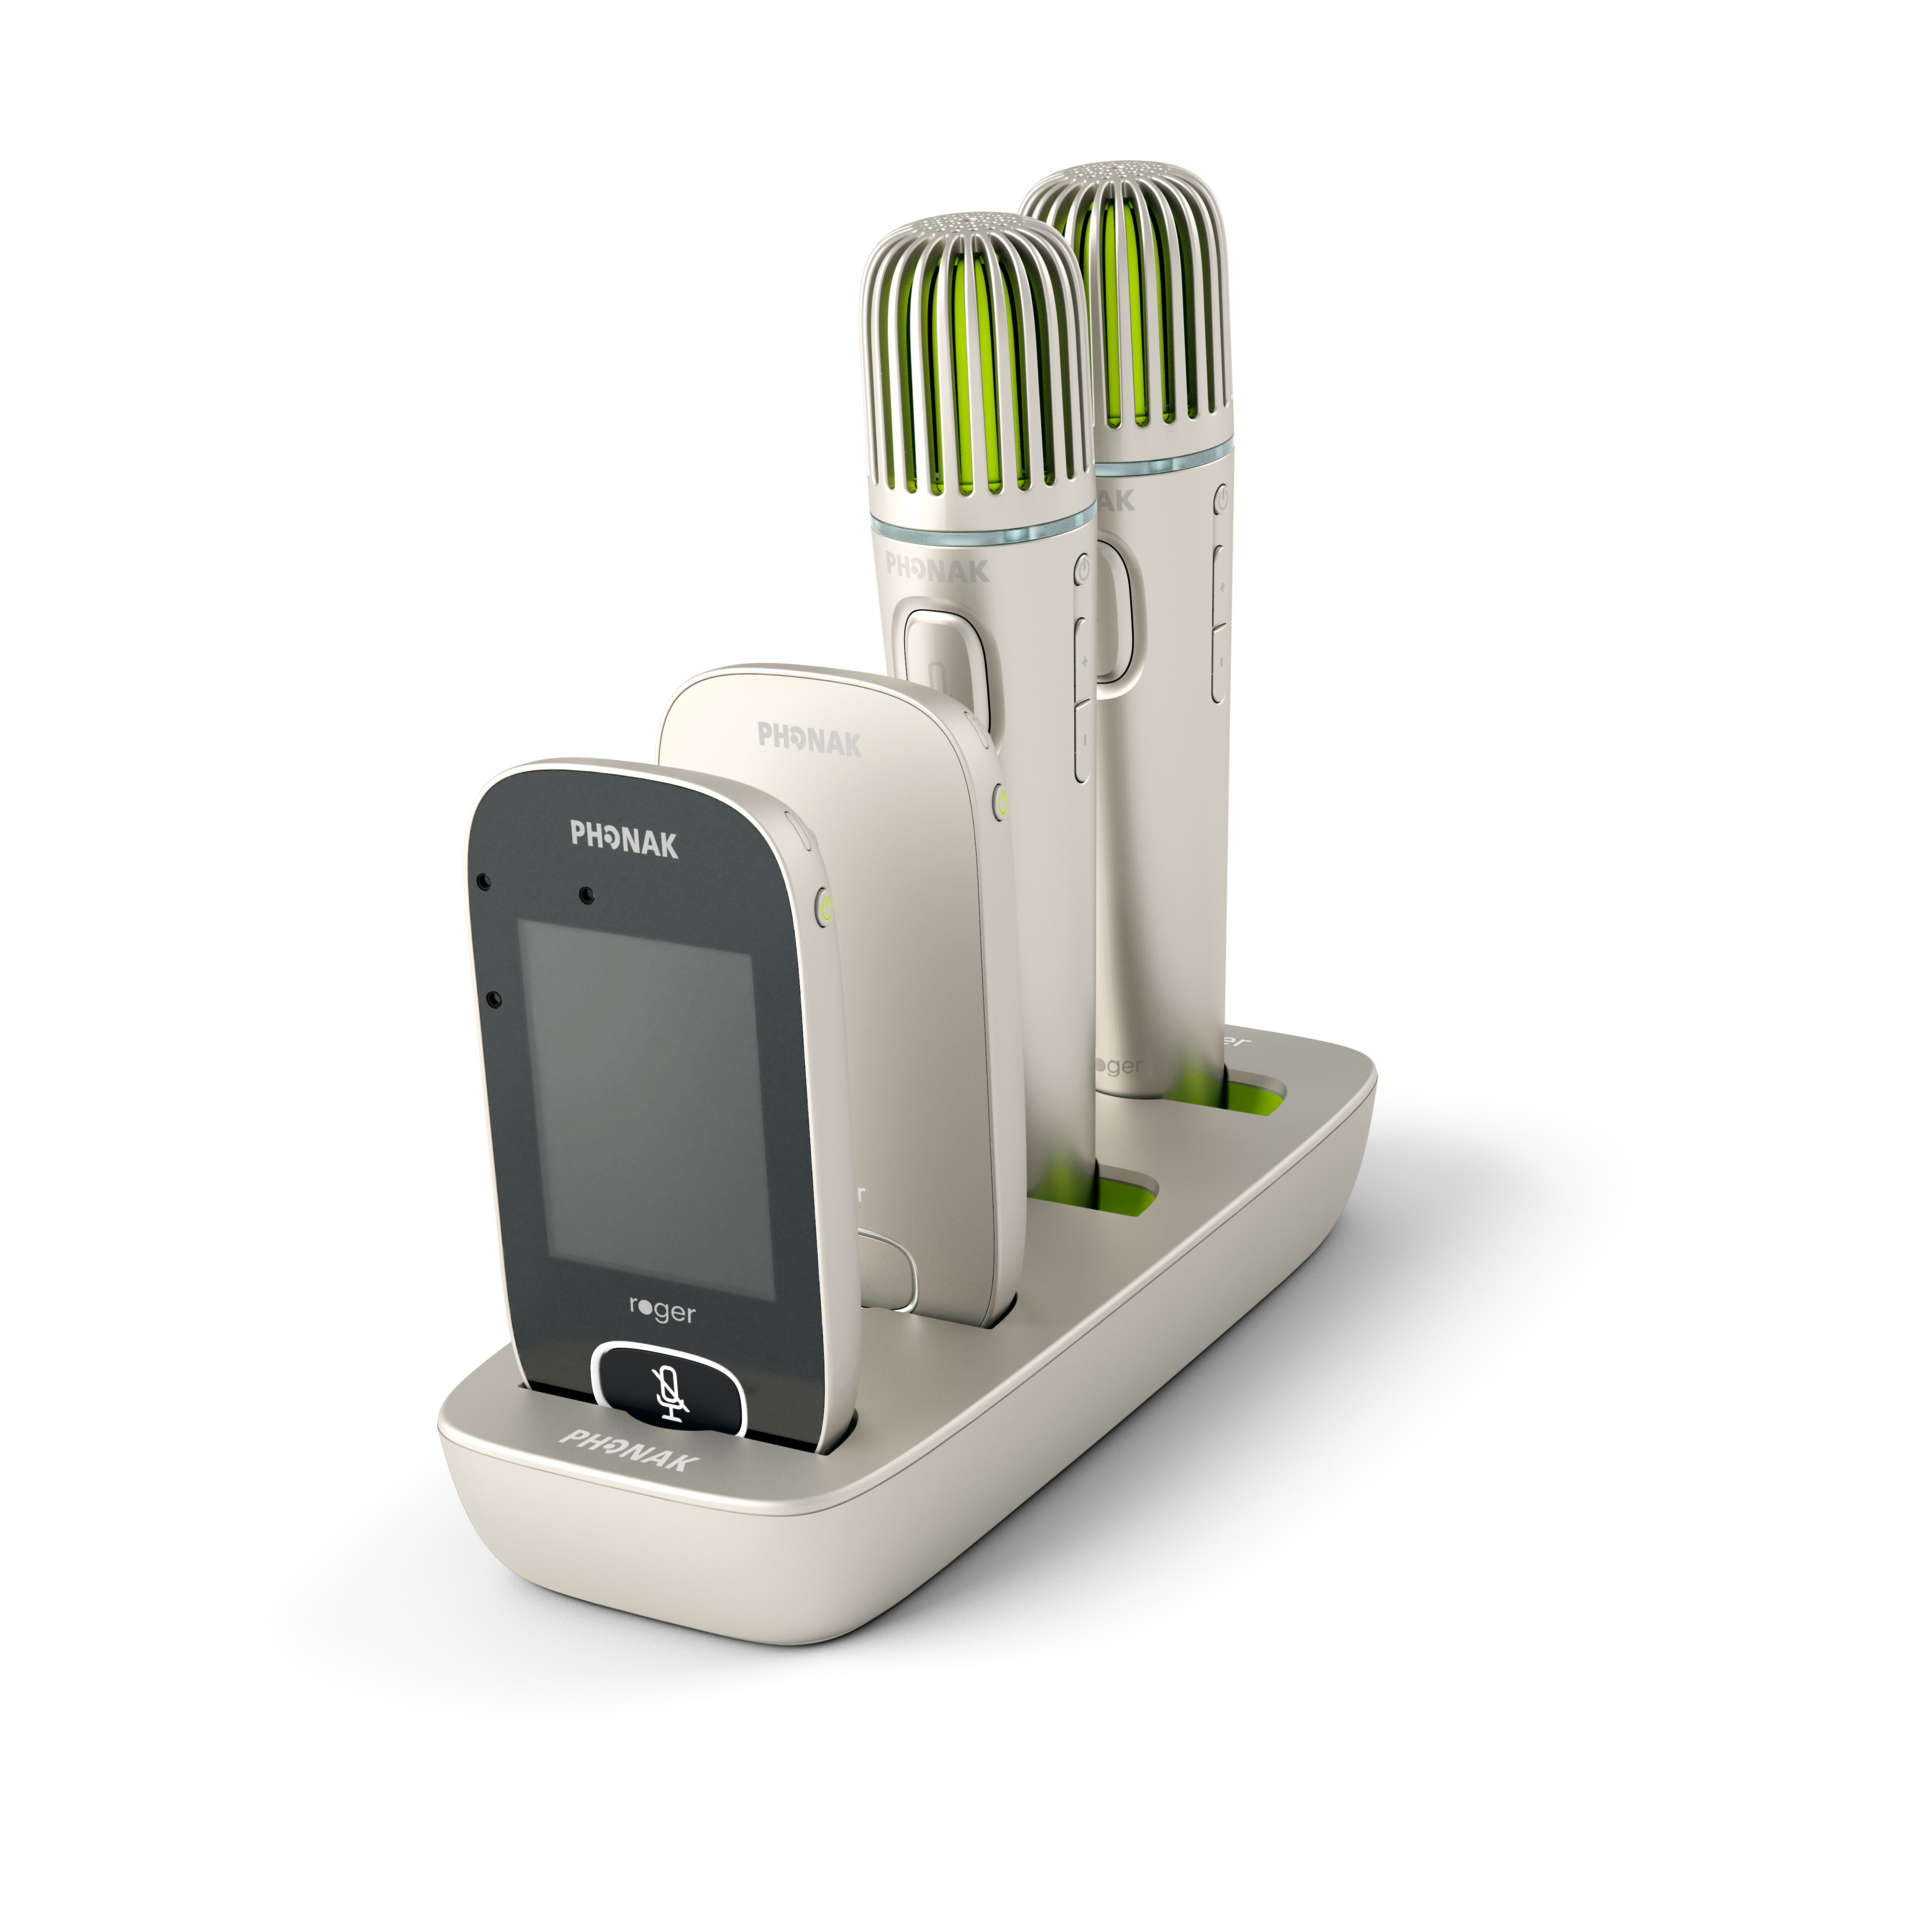 Phonak Roger Charging Rack with four different hearing aid accessories charging.